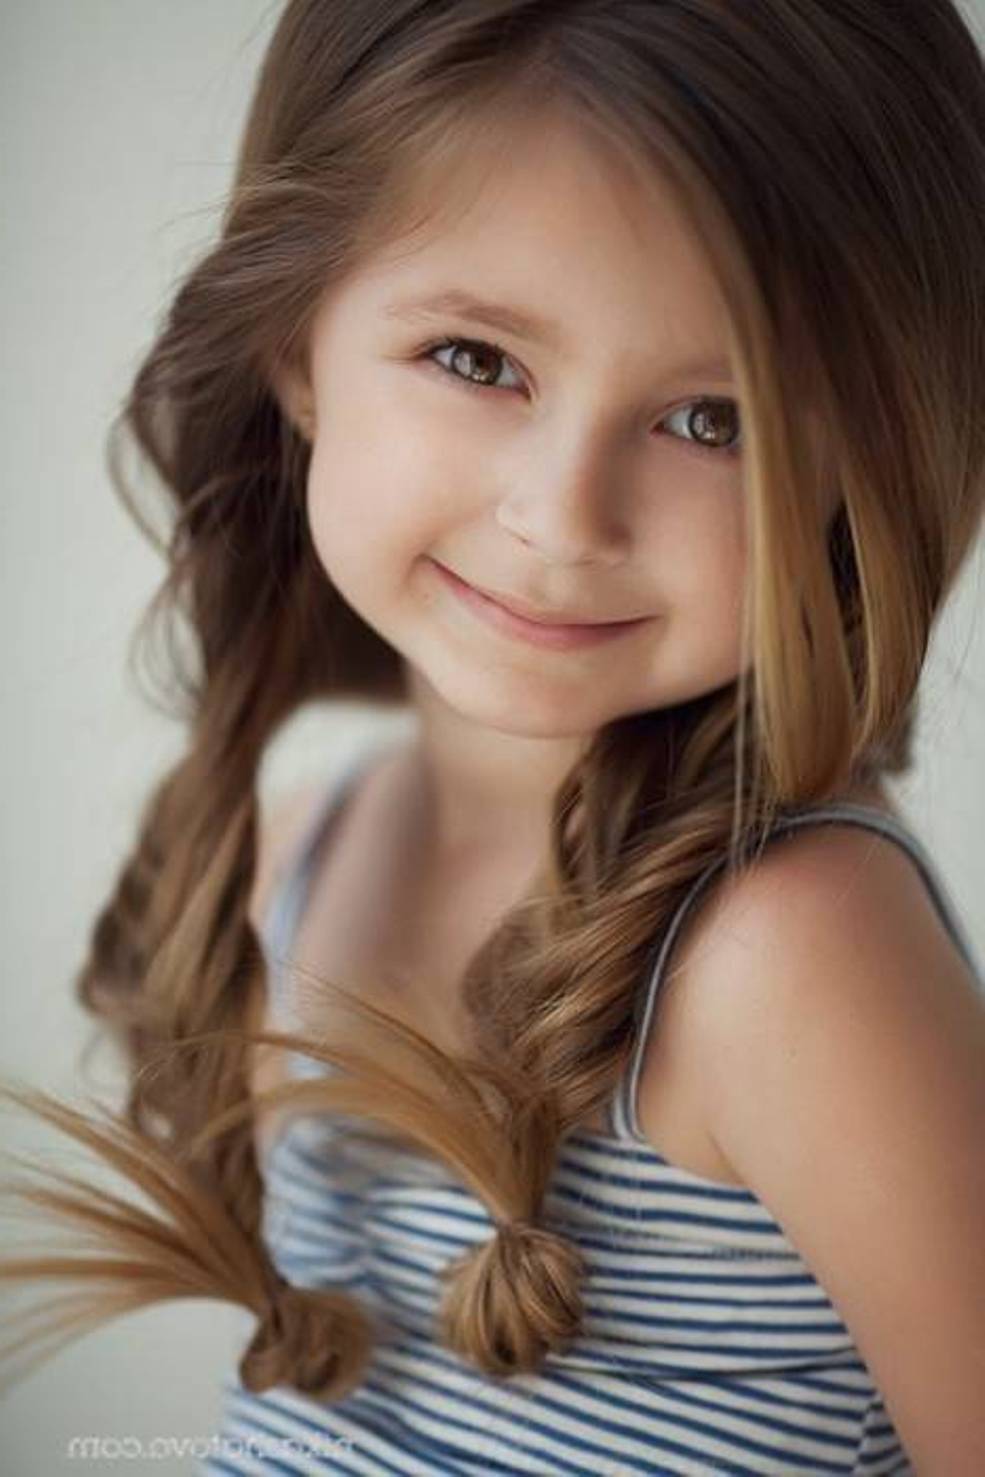 Fancy and Cute Hairstyles For Little Girls